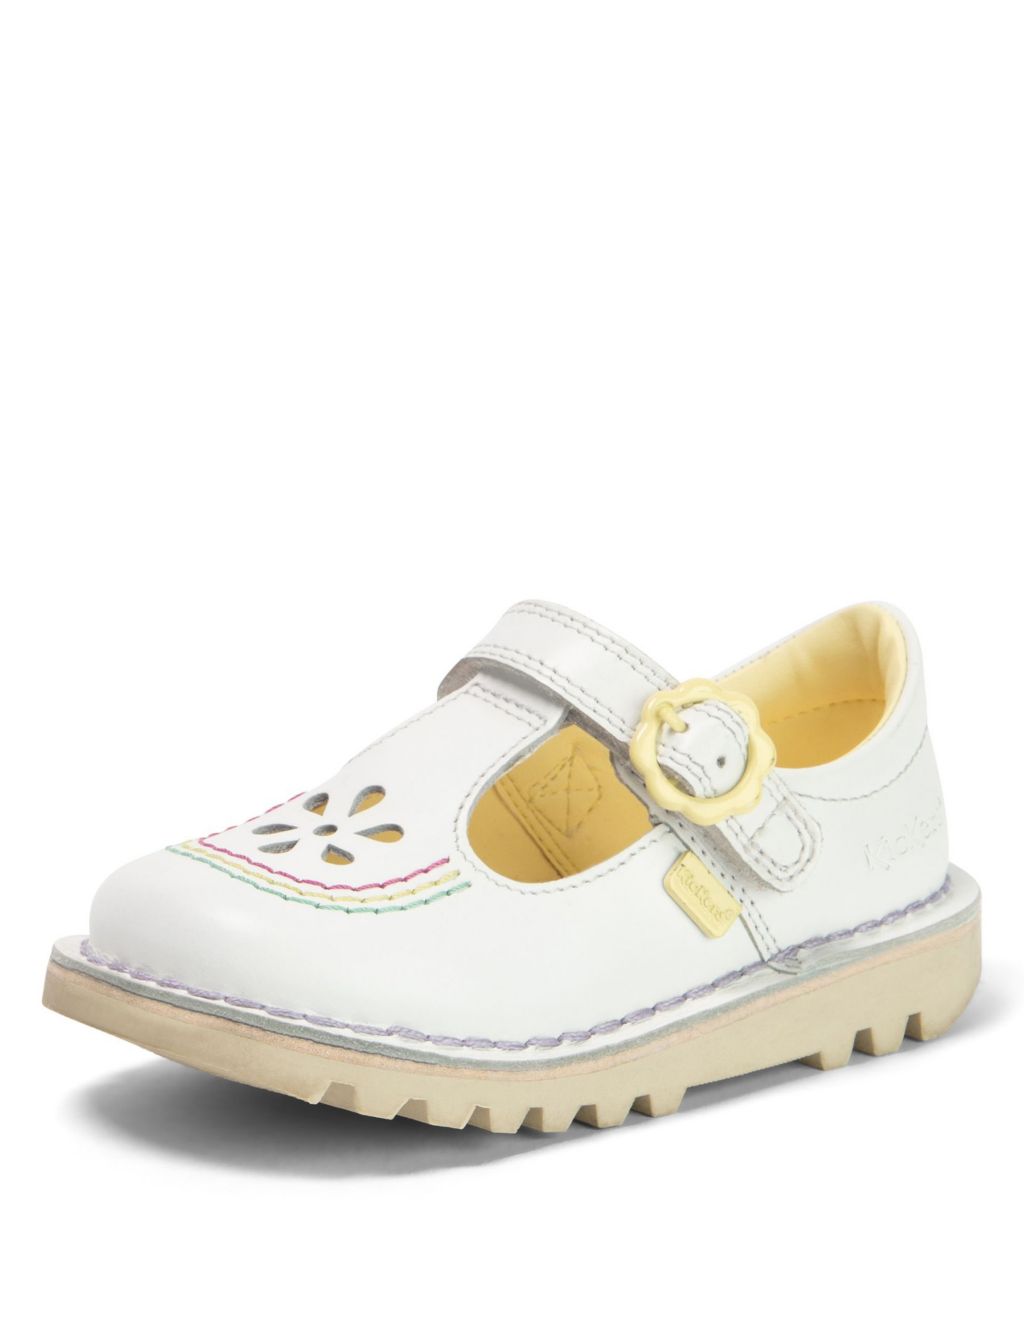 Kids' Leather Flower T-Bar Shoes (7 Small - 12 Small) image 6